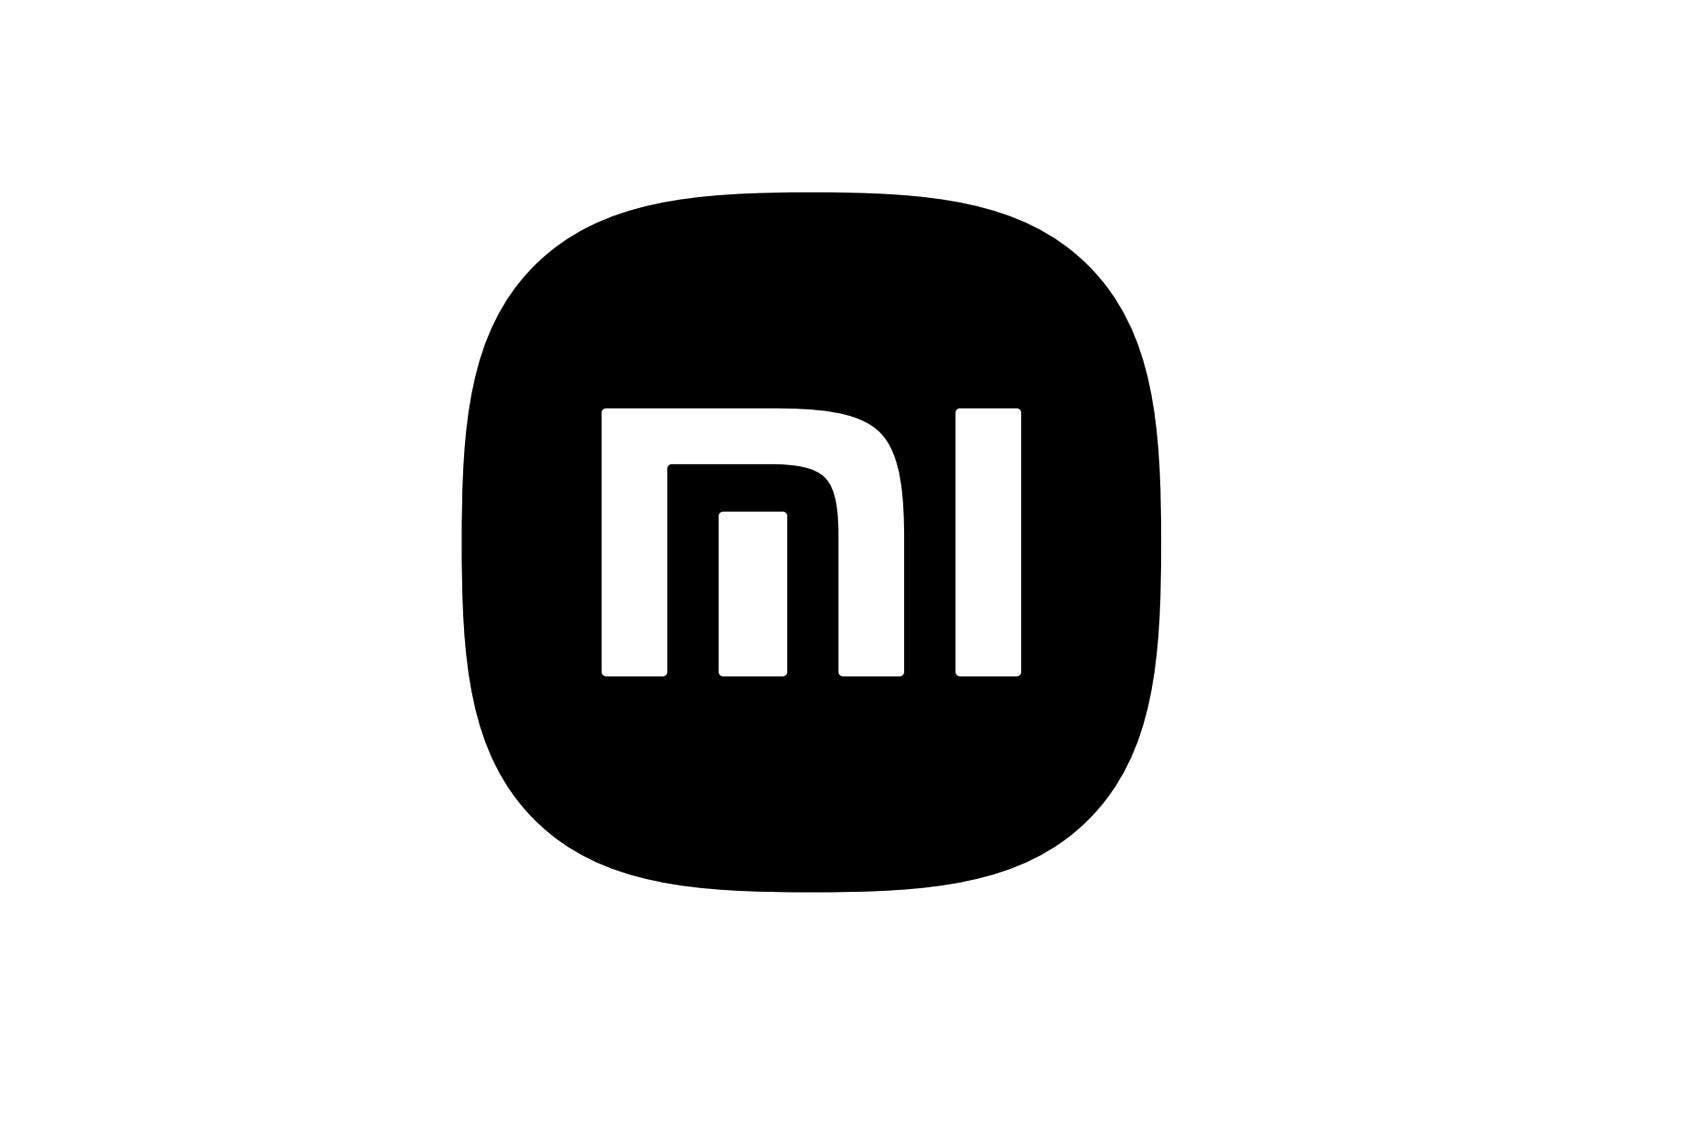 Xiaomi logo in new colors: The company patented it in black and white